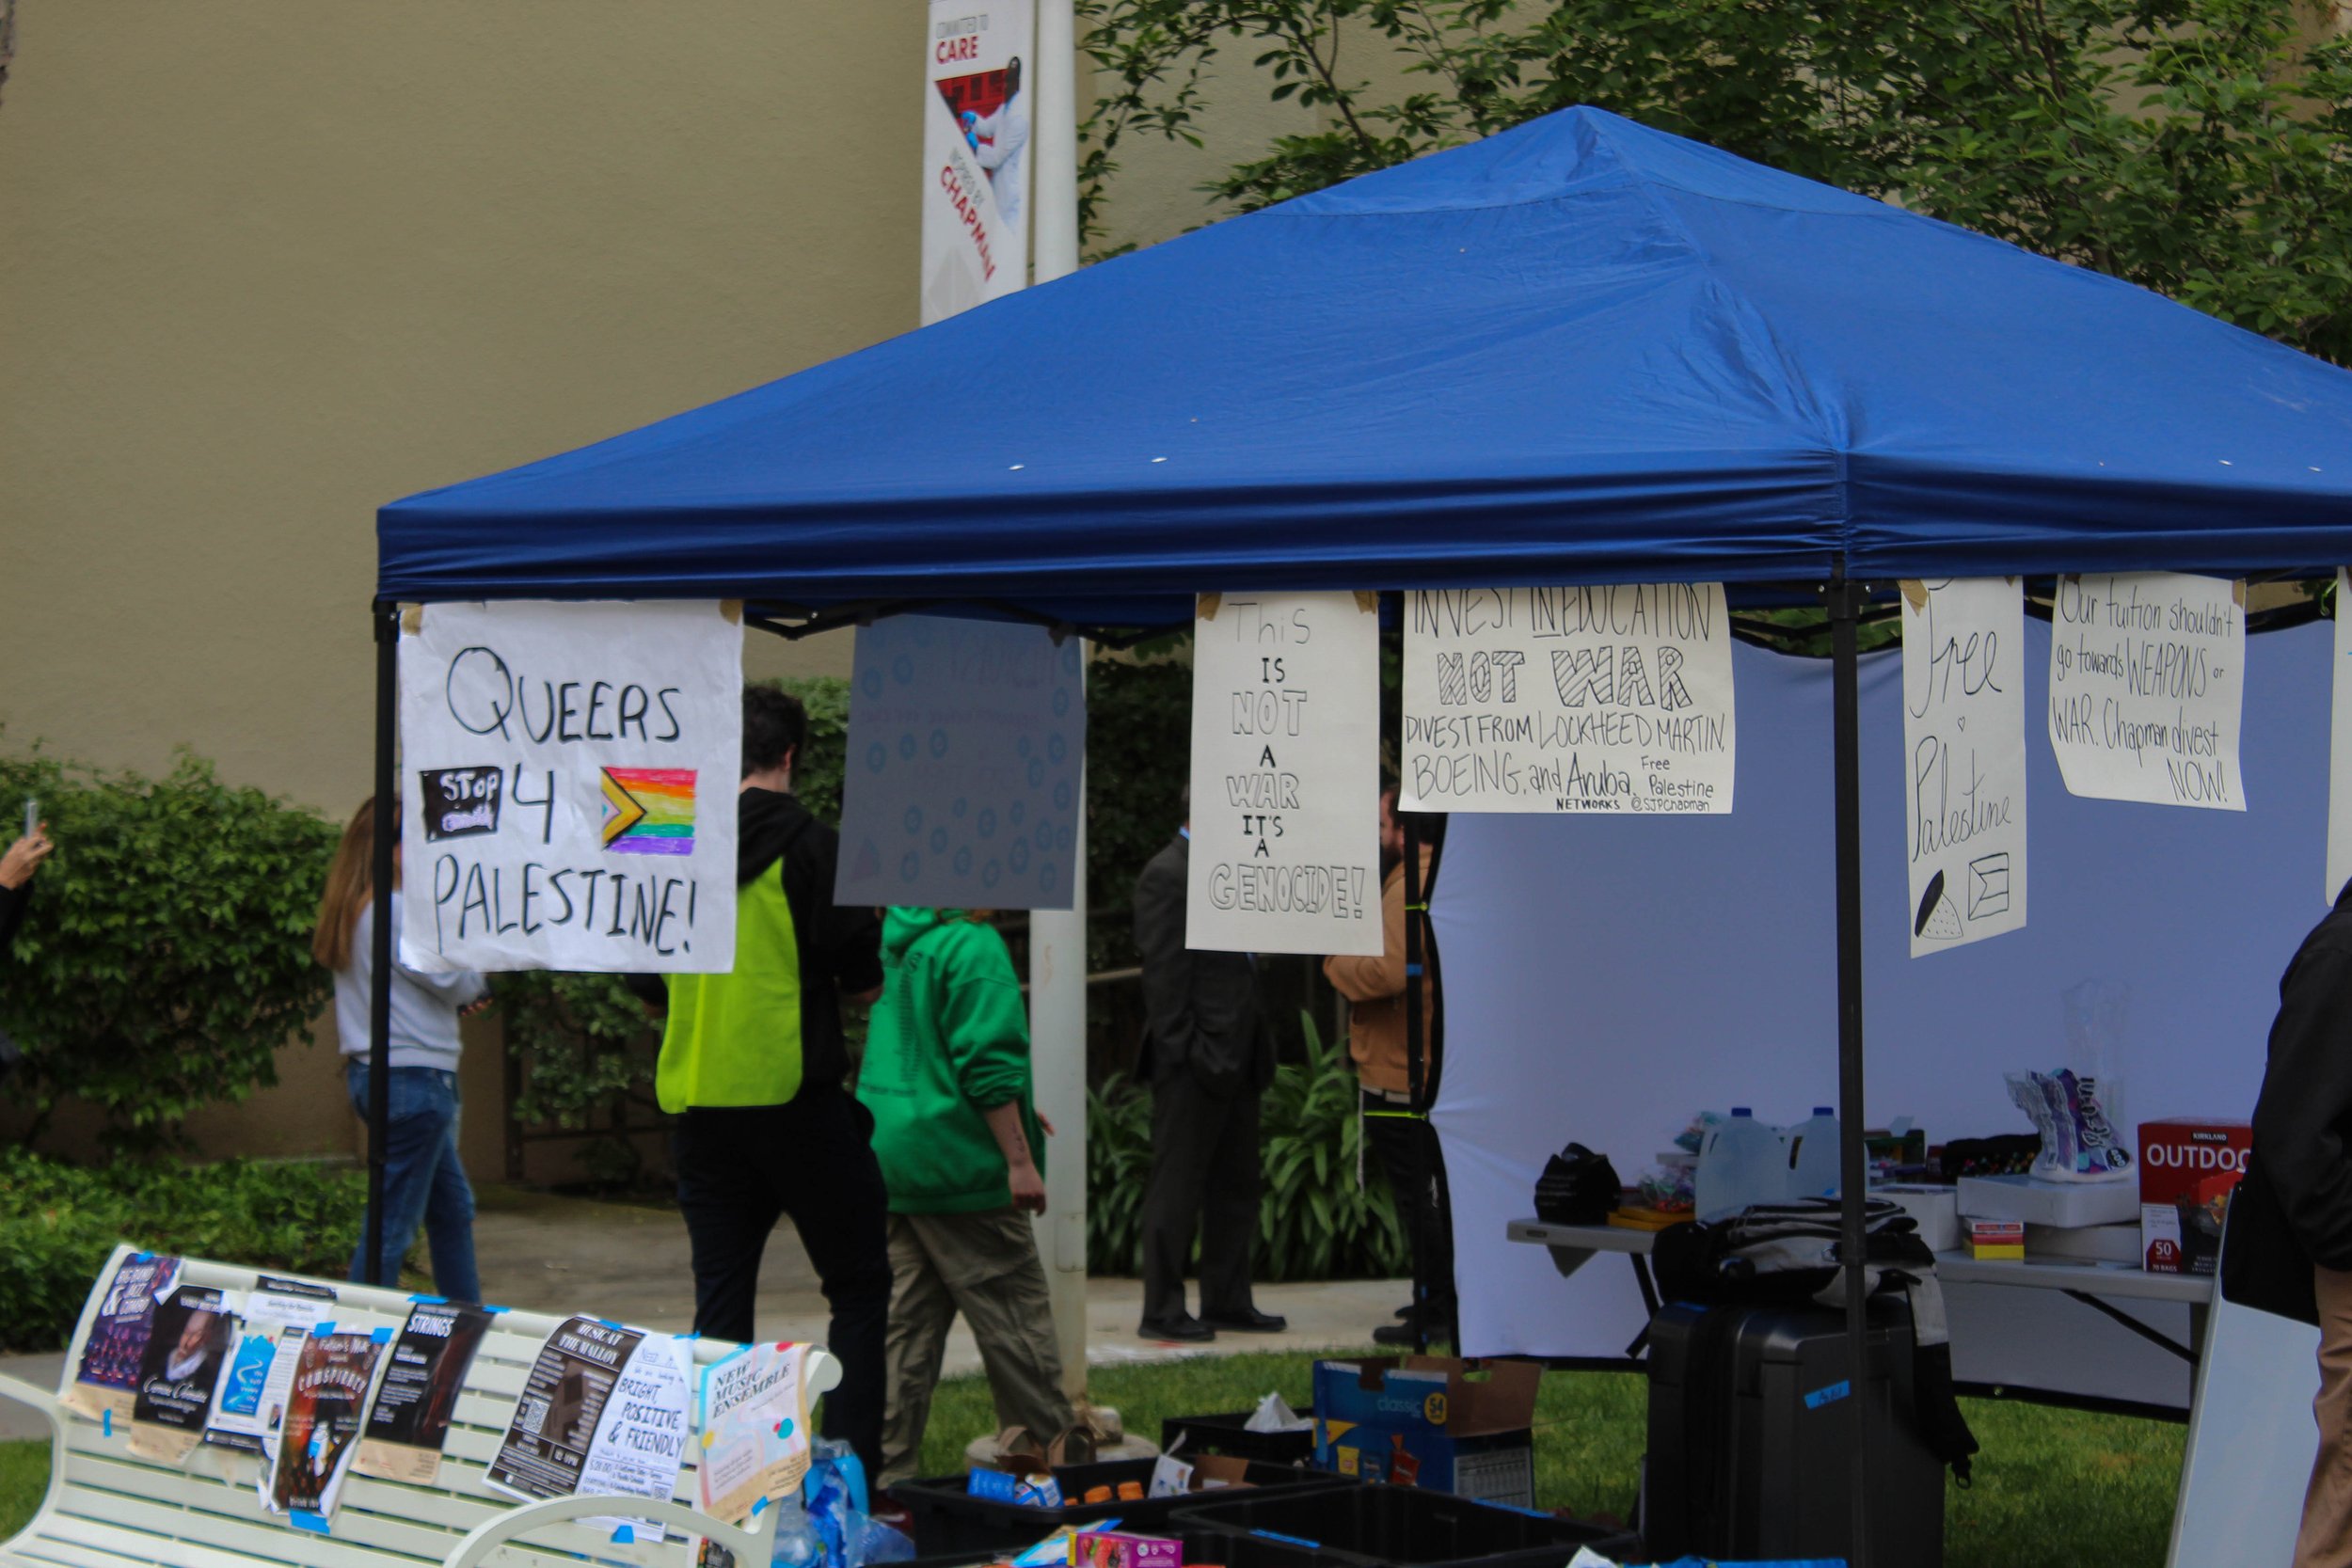    Posters displayed at the beverage tent. Photo by RENEE ELEFANTE, Editor-in-Chief   